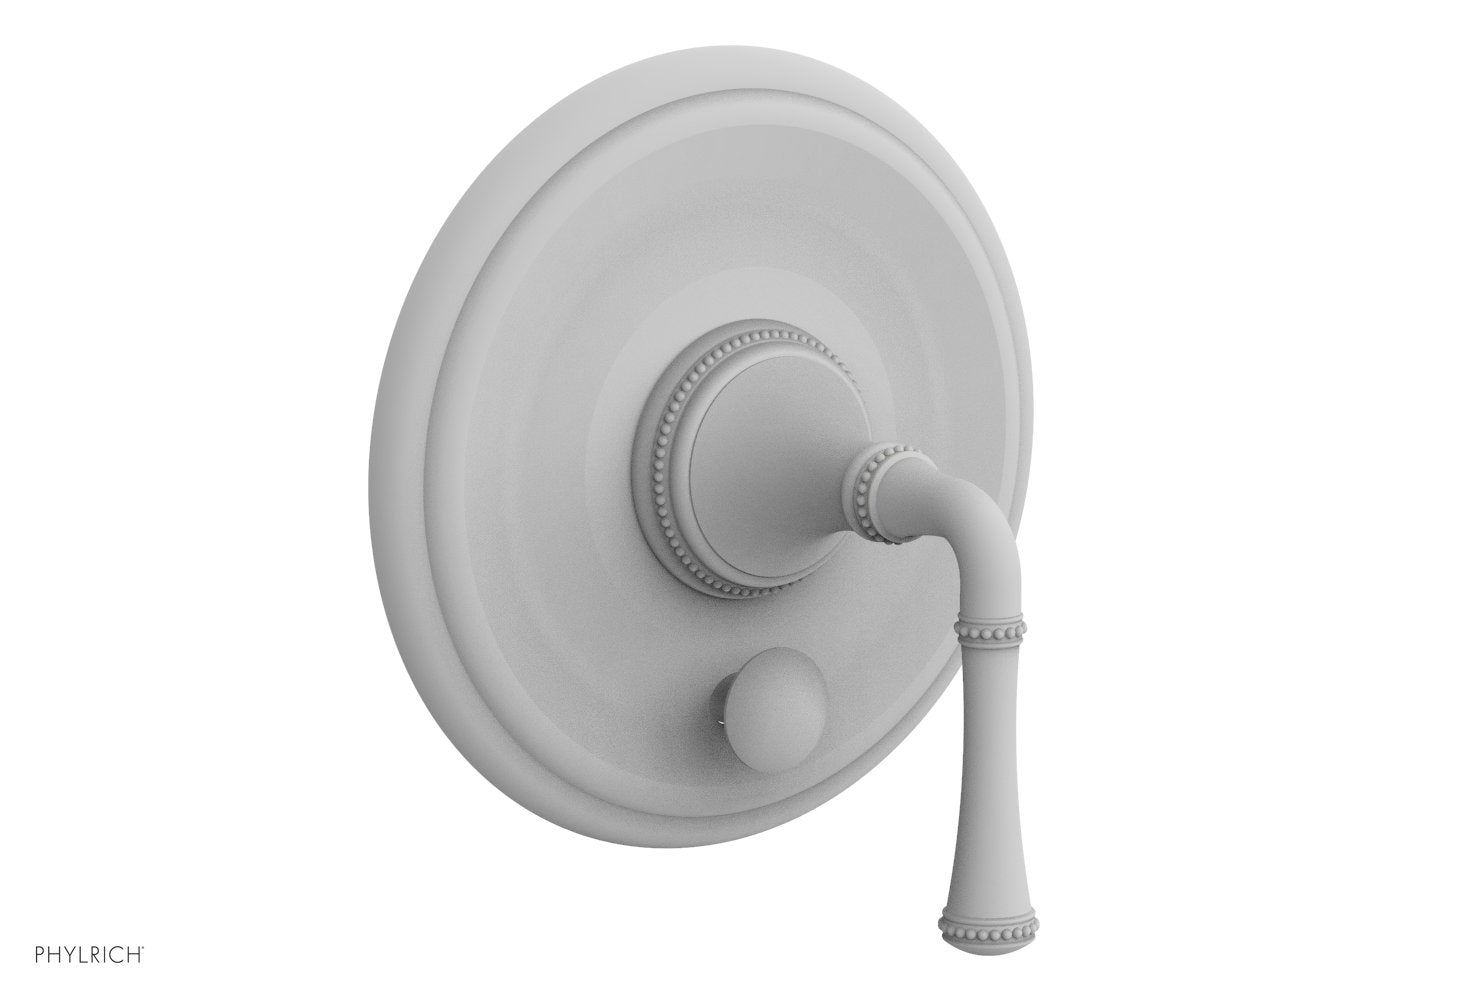 Phylrich BEADED Pressure Balance Shower Plate with Diverter and Handle Trim Set